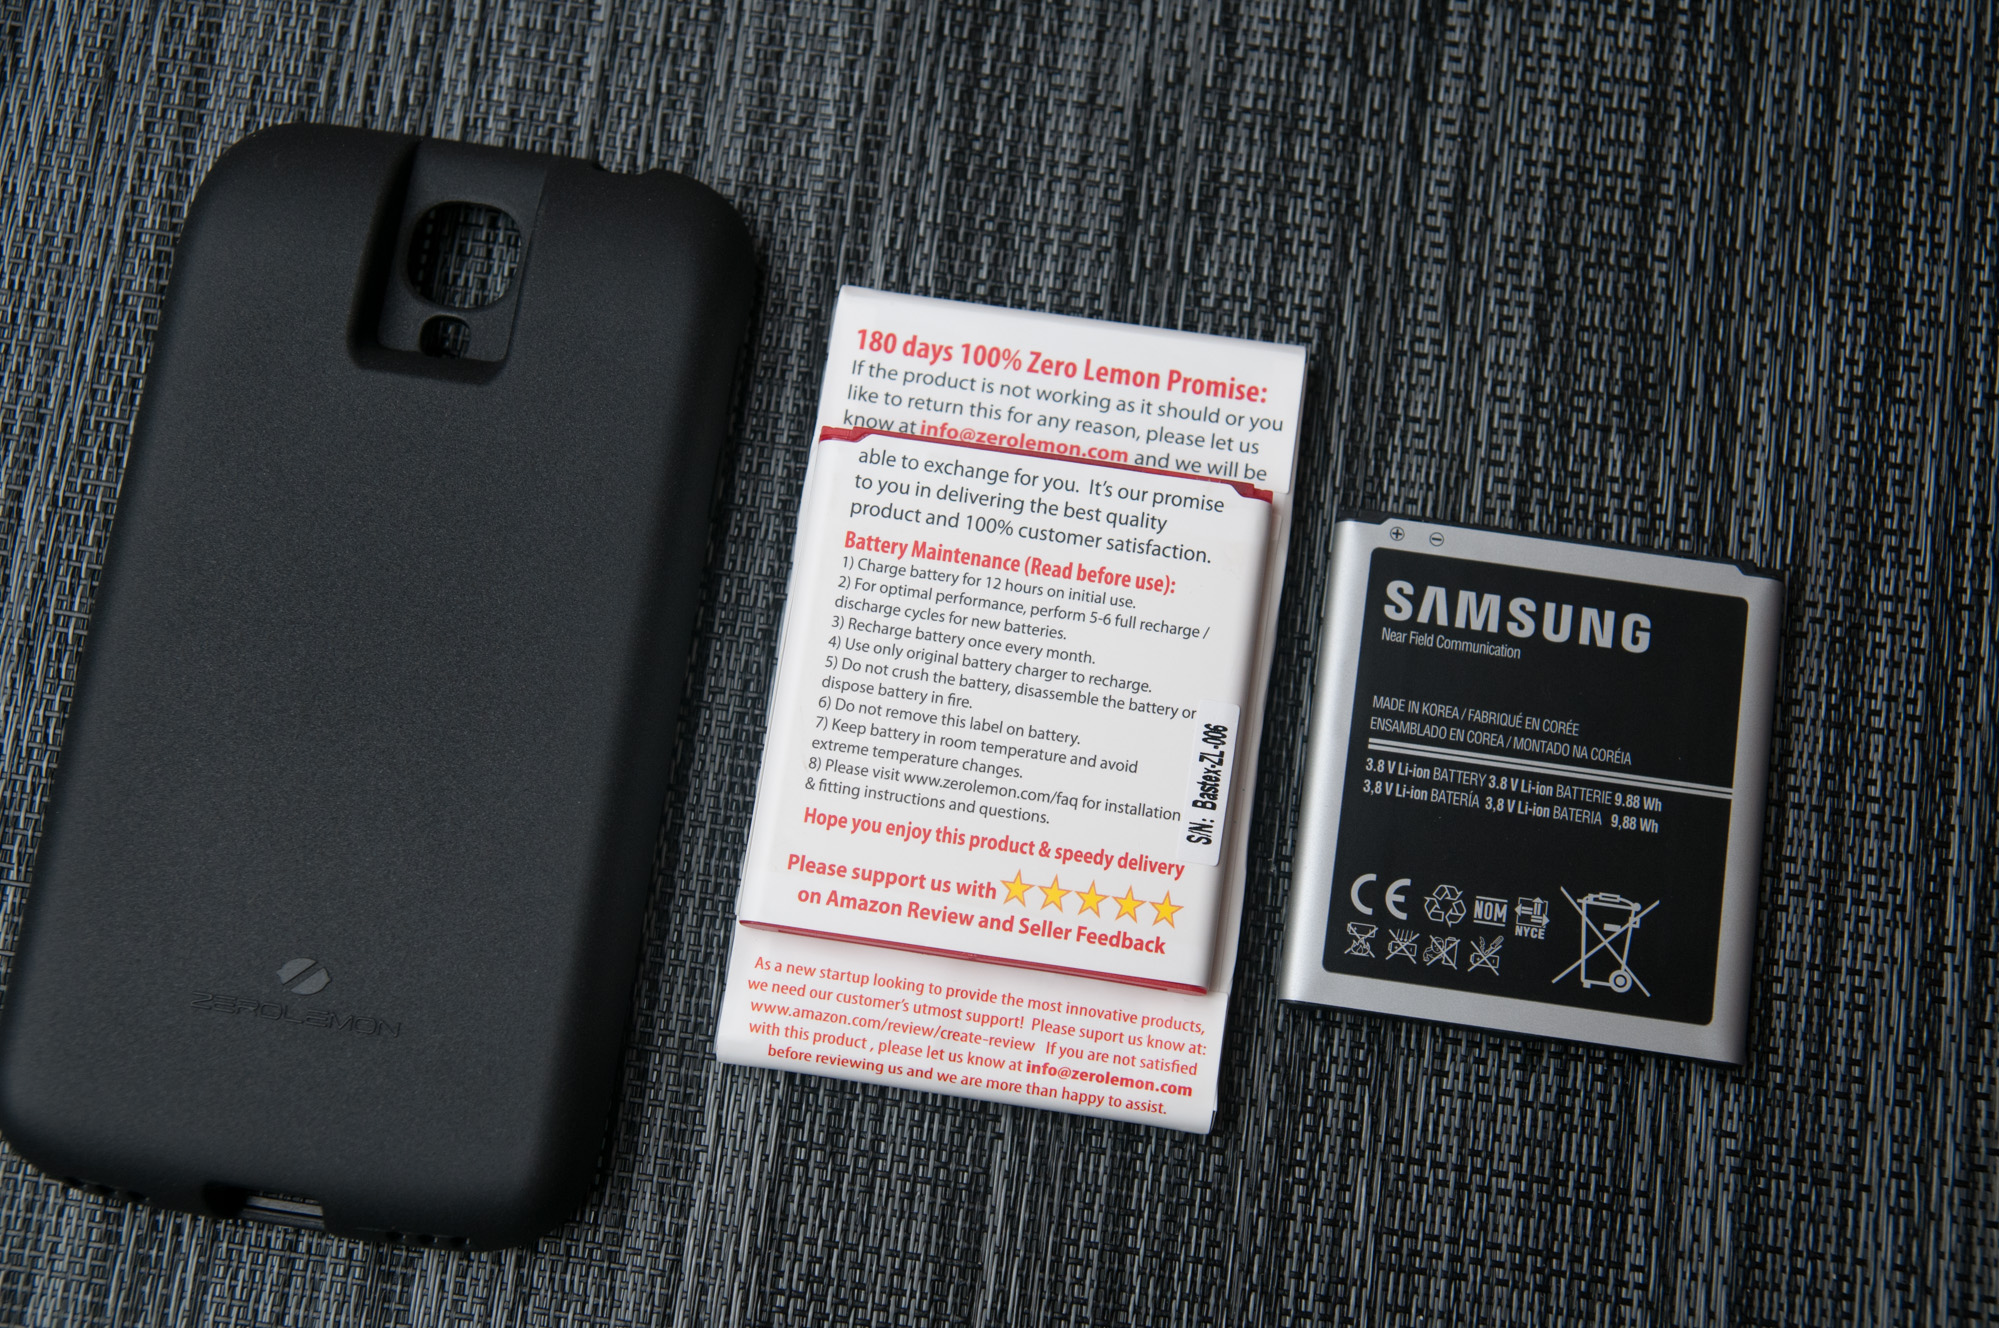 Skeptical Road making process pick Samsung Galaxy S 4 ZeroLemon 7500 mAh Extended Battery Review